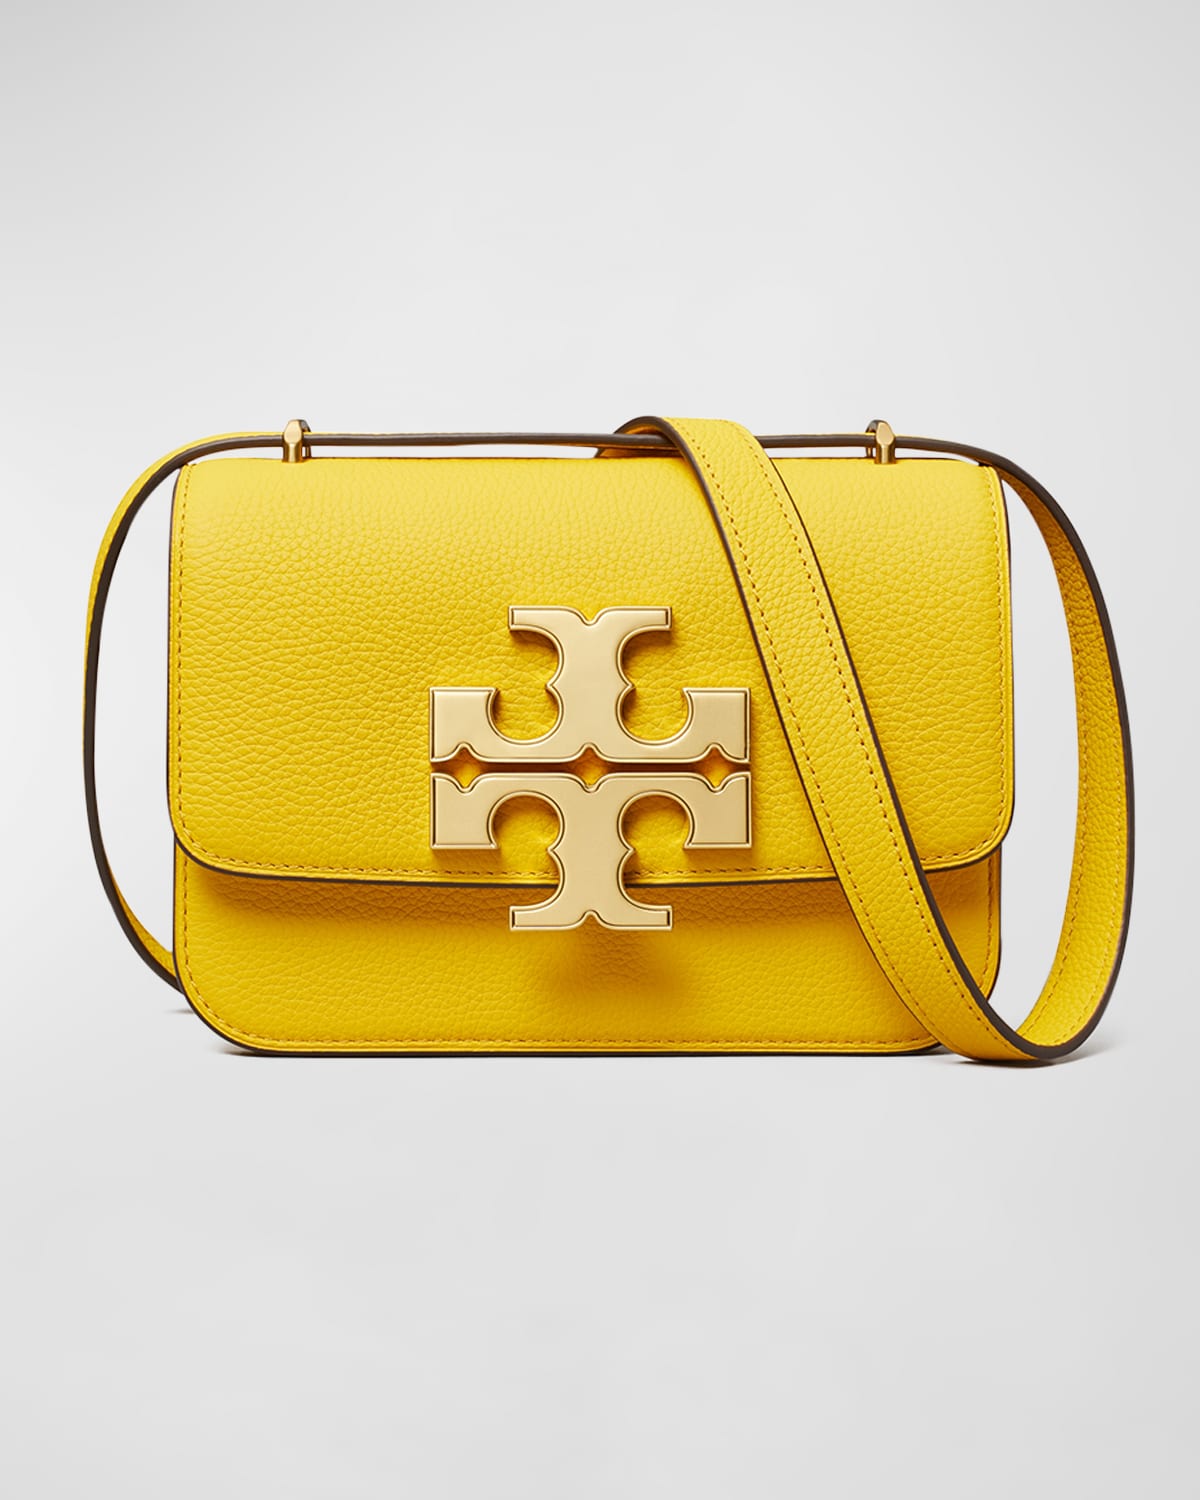 Tory Burch Eleanor Small Leather Convertible Shoulder Bag | Neiman Marcus